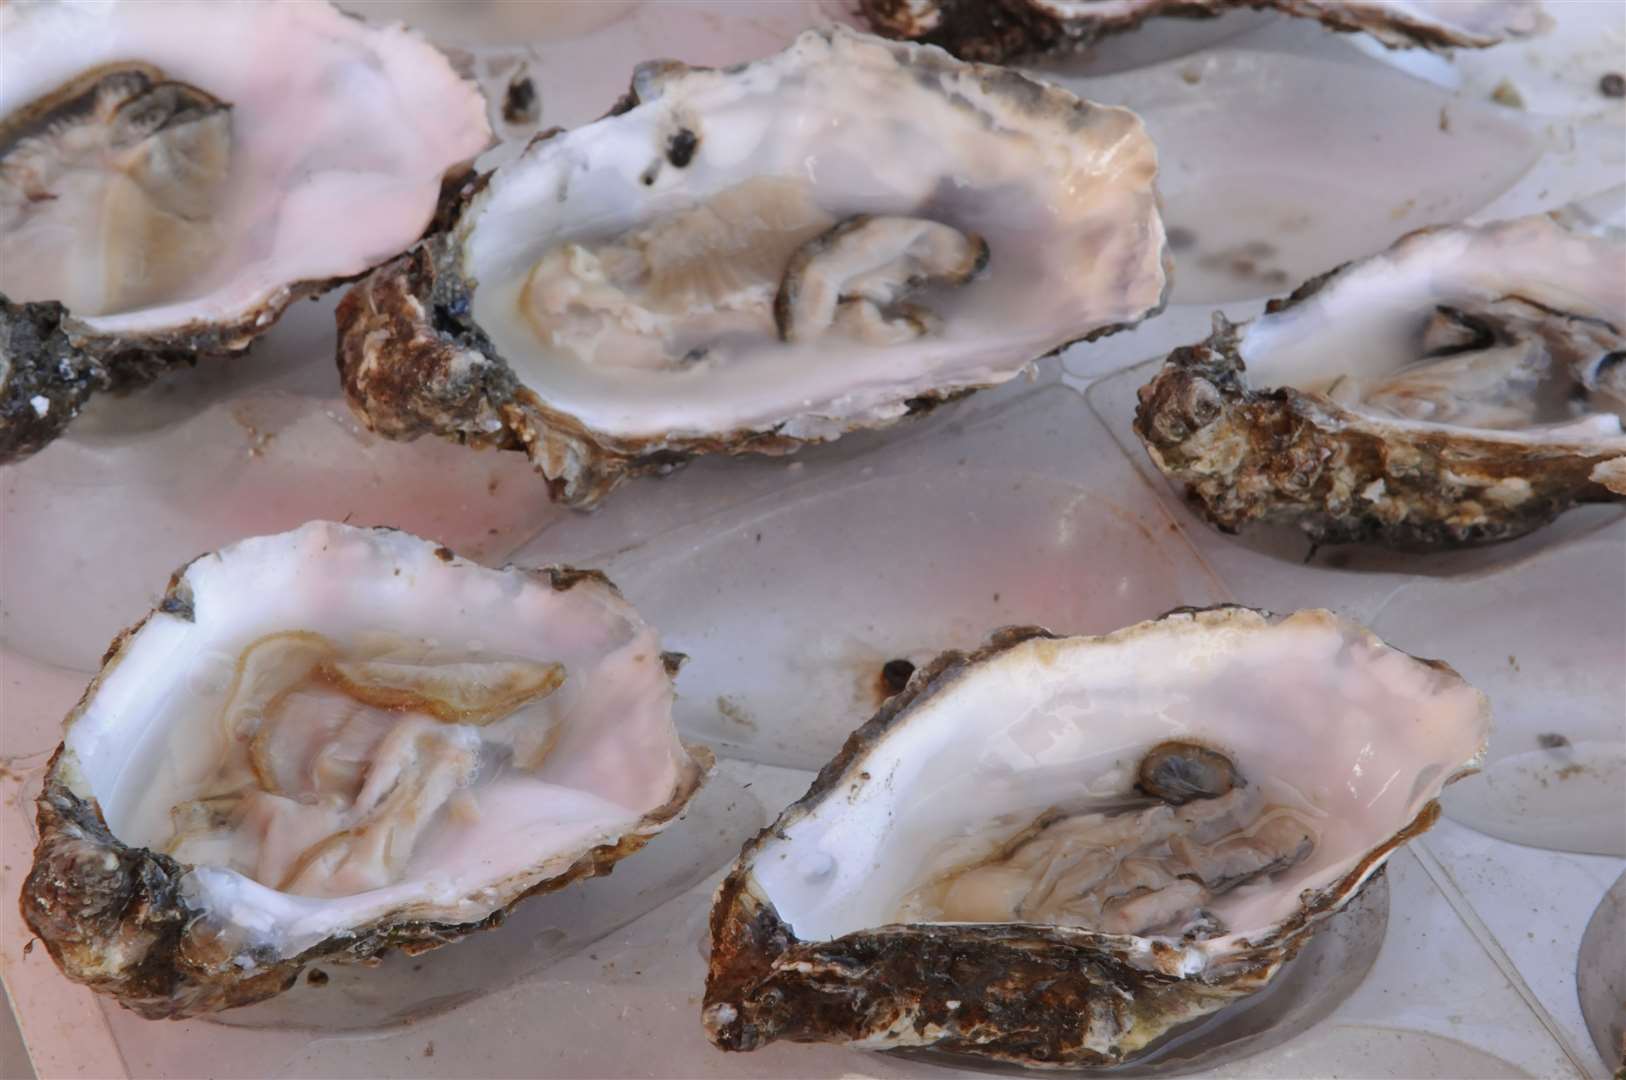 At least 100 people reportedly fell ill after eating oysters